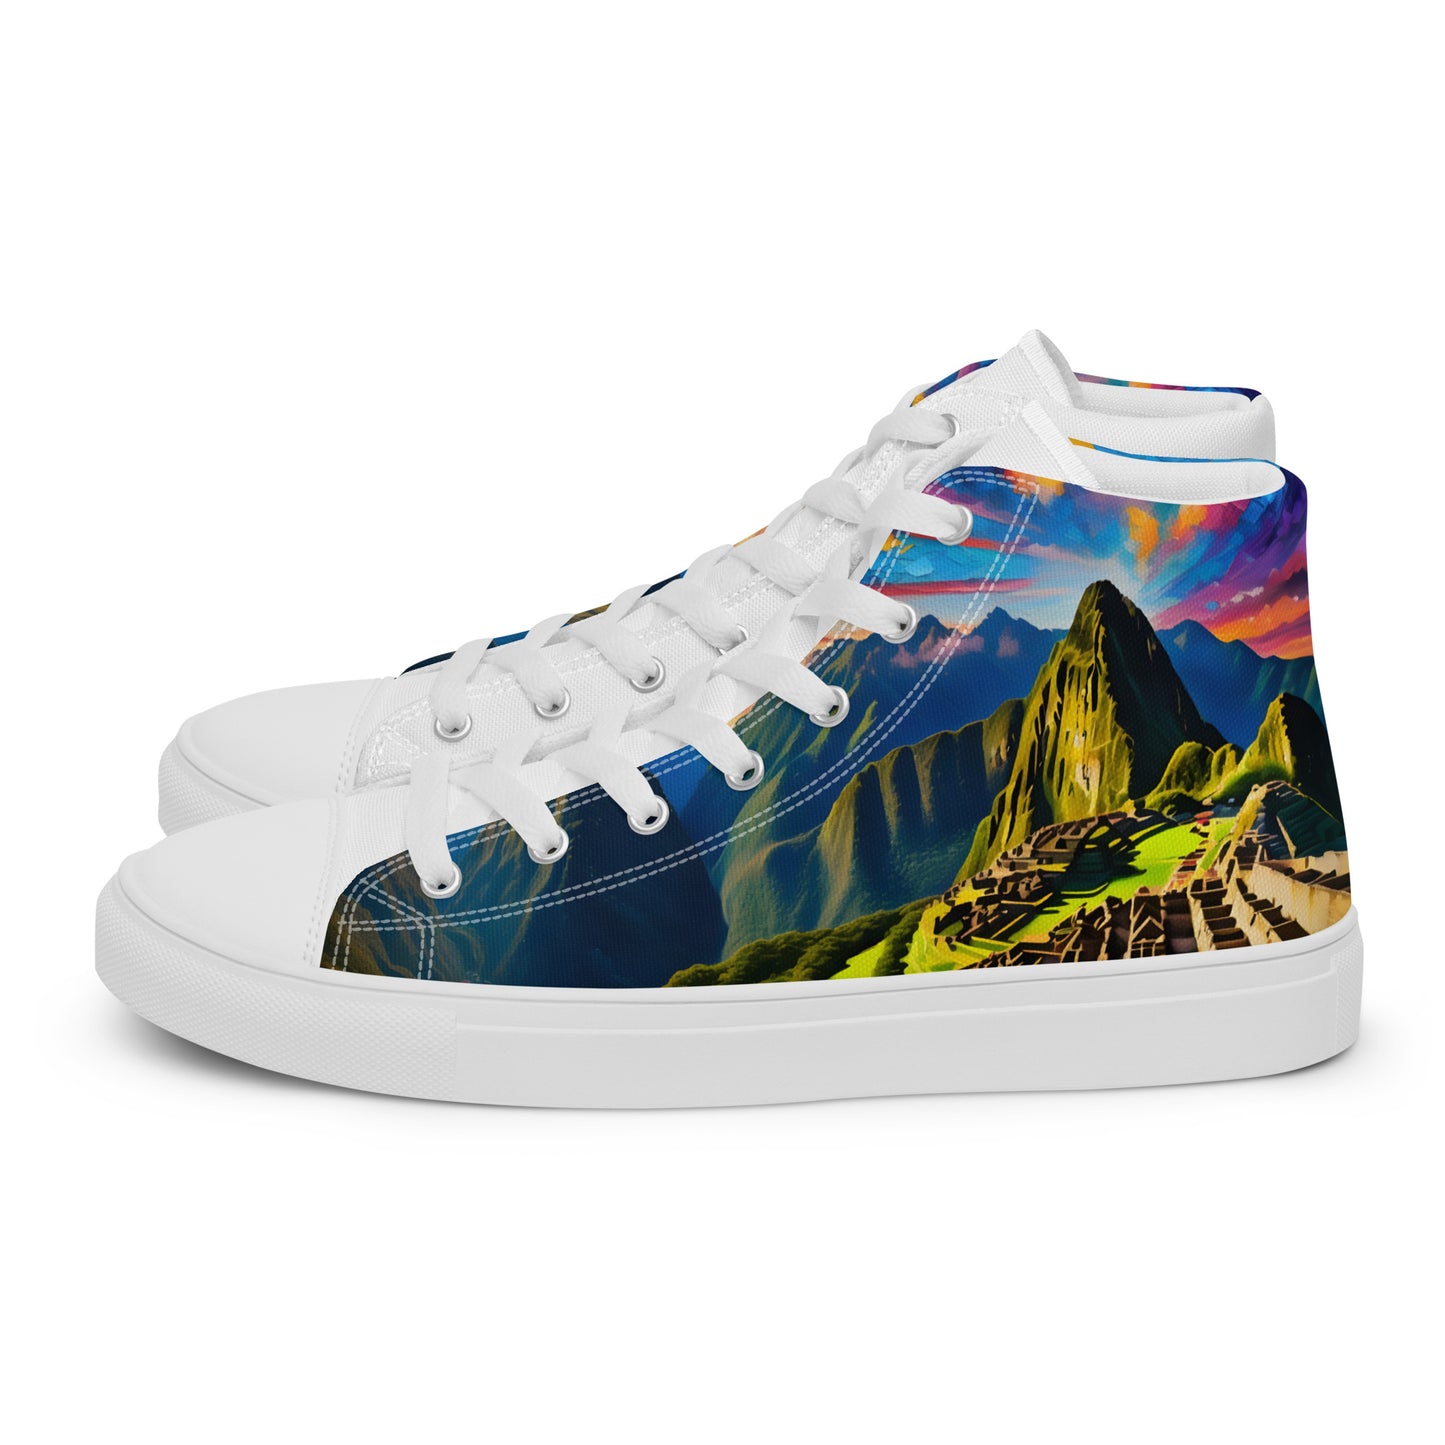 Machu Picchu - Stained glass - Men - White - High top shoes